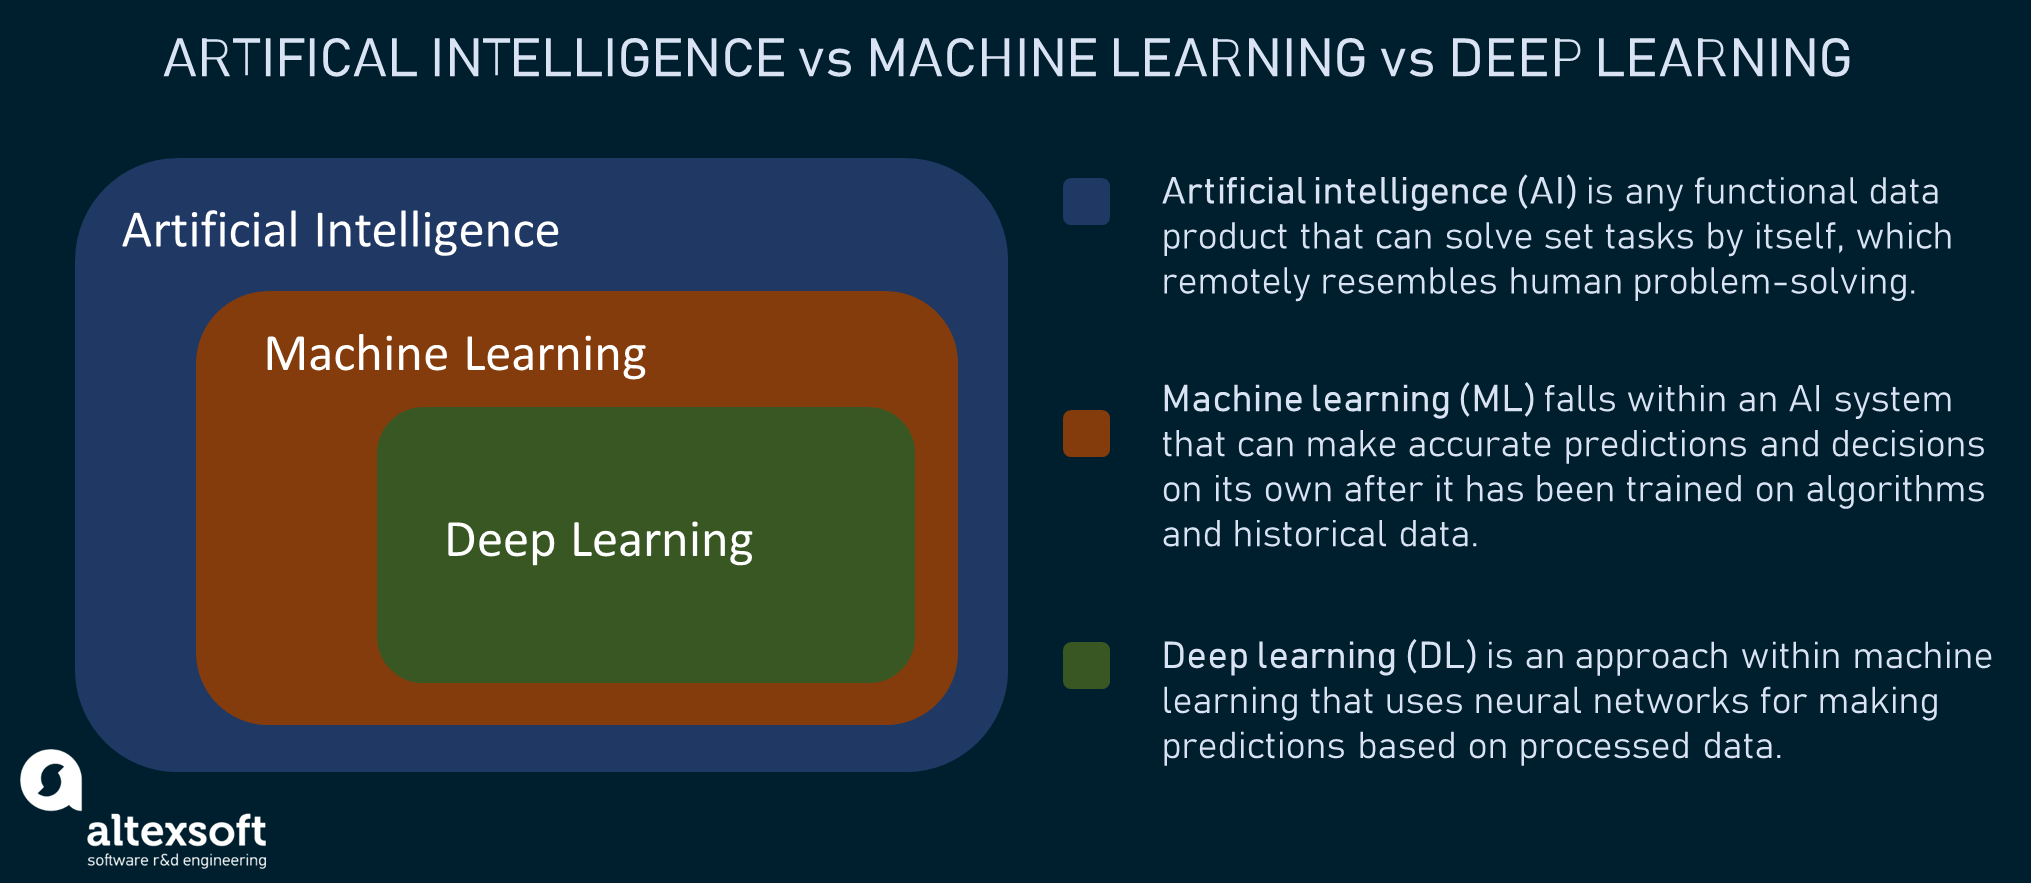 How artificial intelligence, machine learning, and deep learning are related